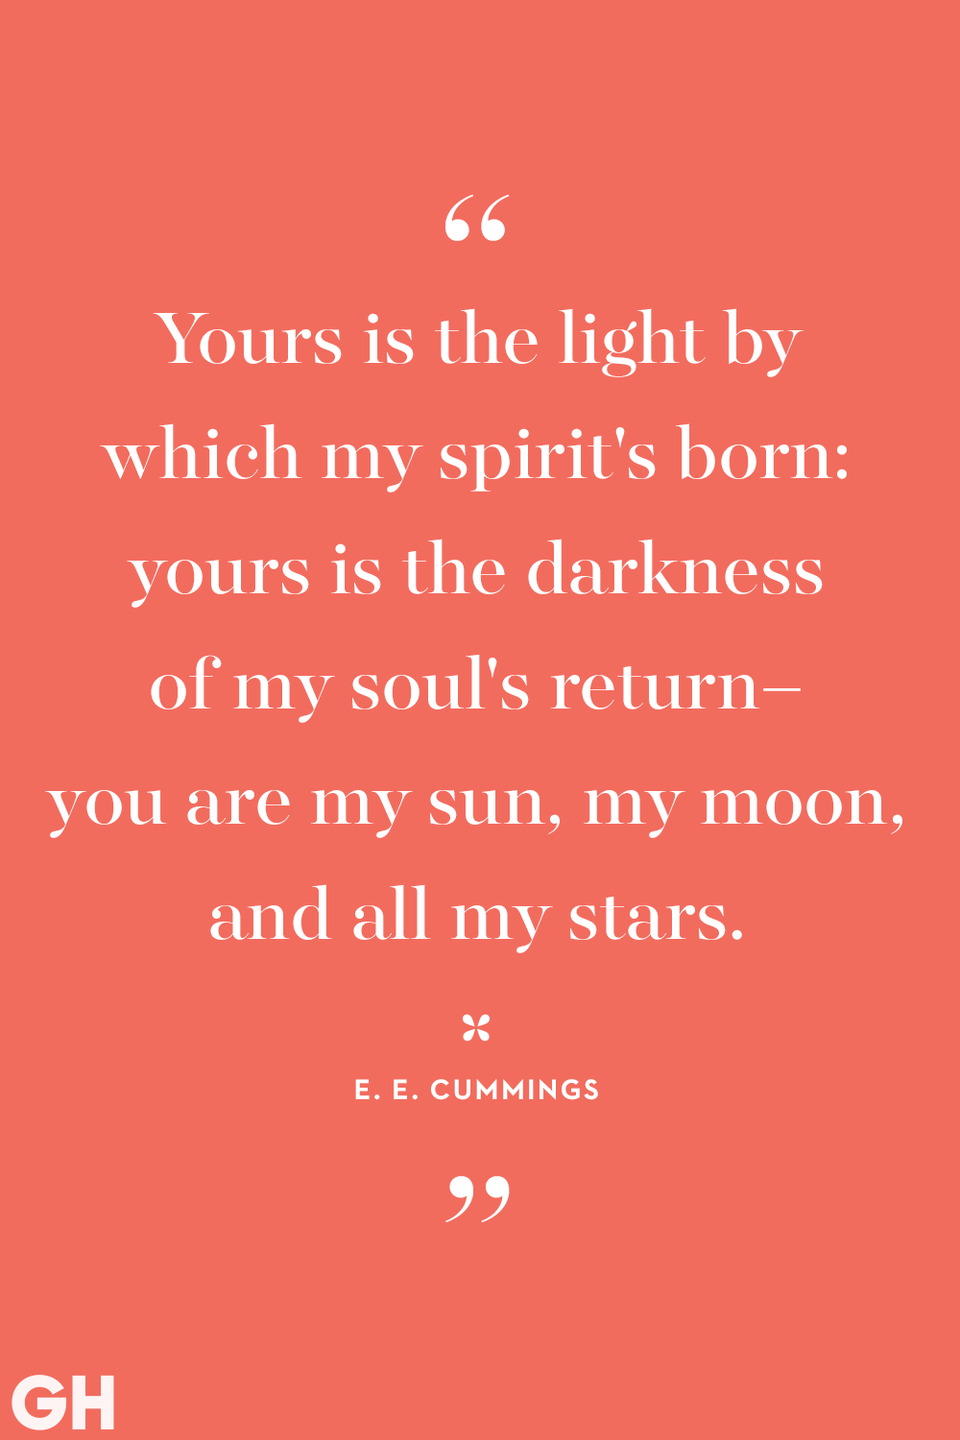 <p>Yours is the light by which my spirit's born: yours is the darkness of my soul's return–you are my sun, my moon ,and all my stars.</p>